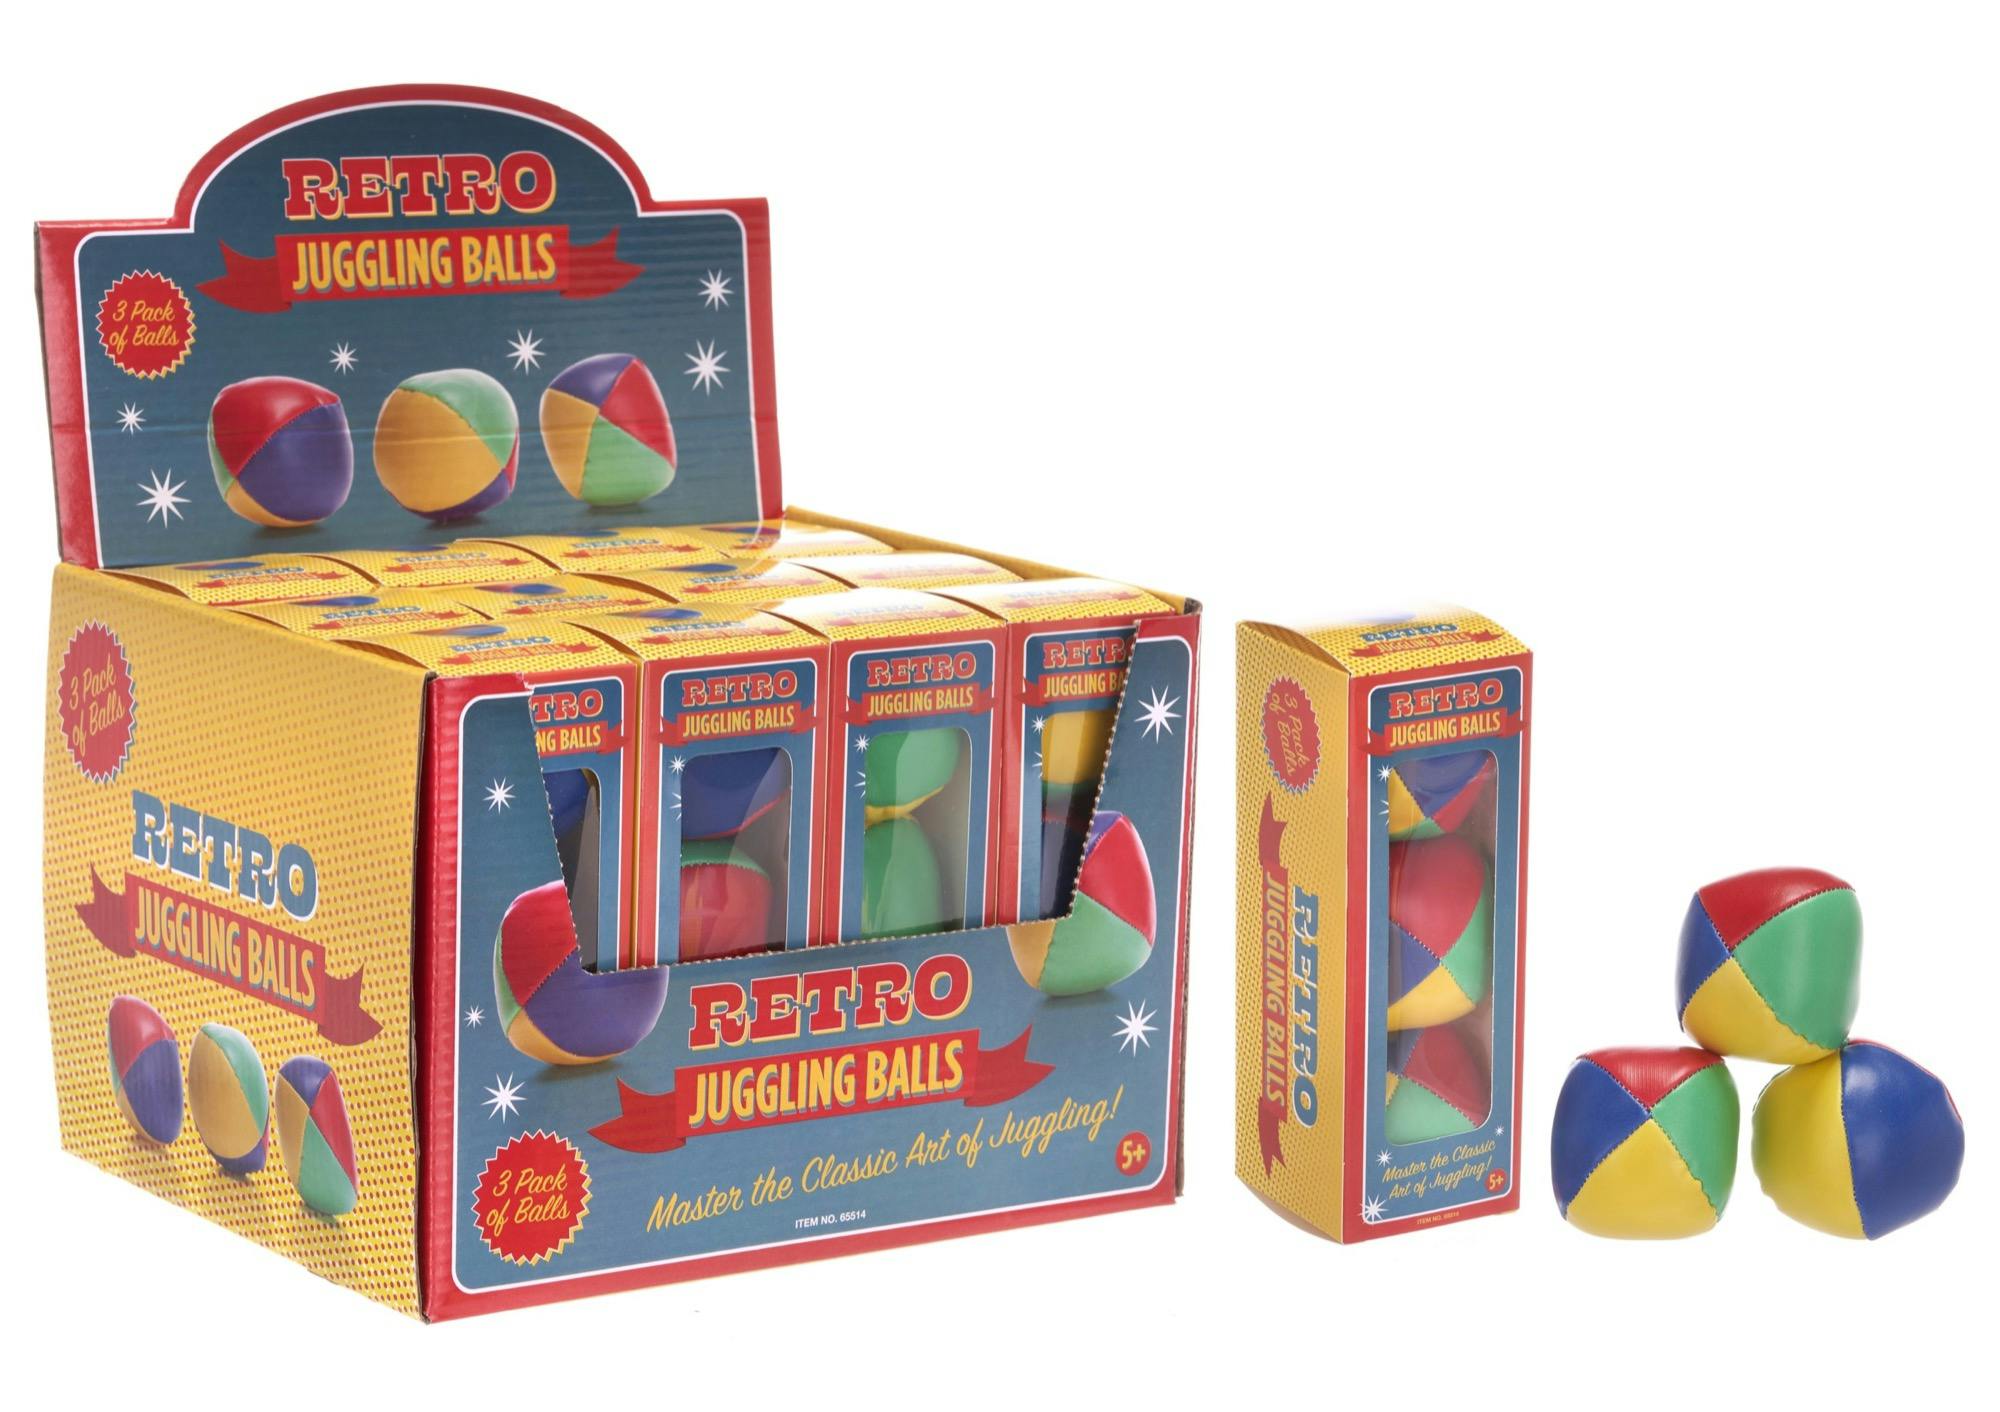 Product - Juggling Balls 3 pack